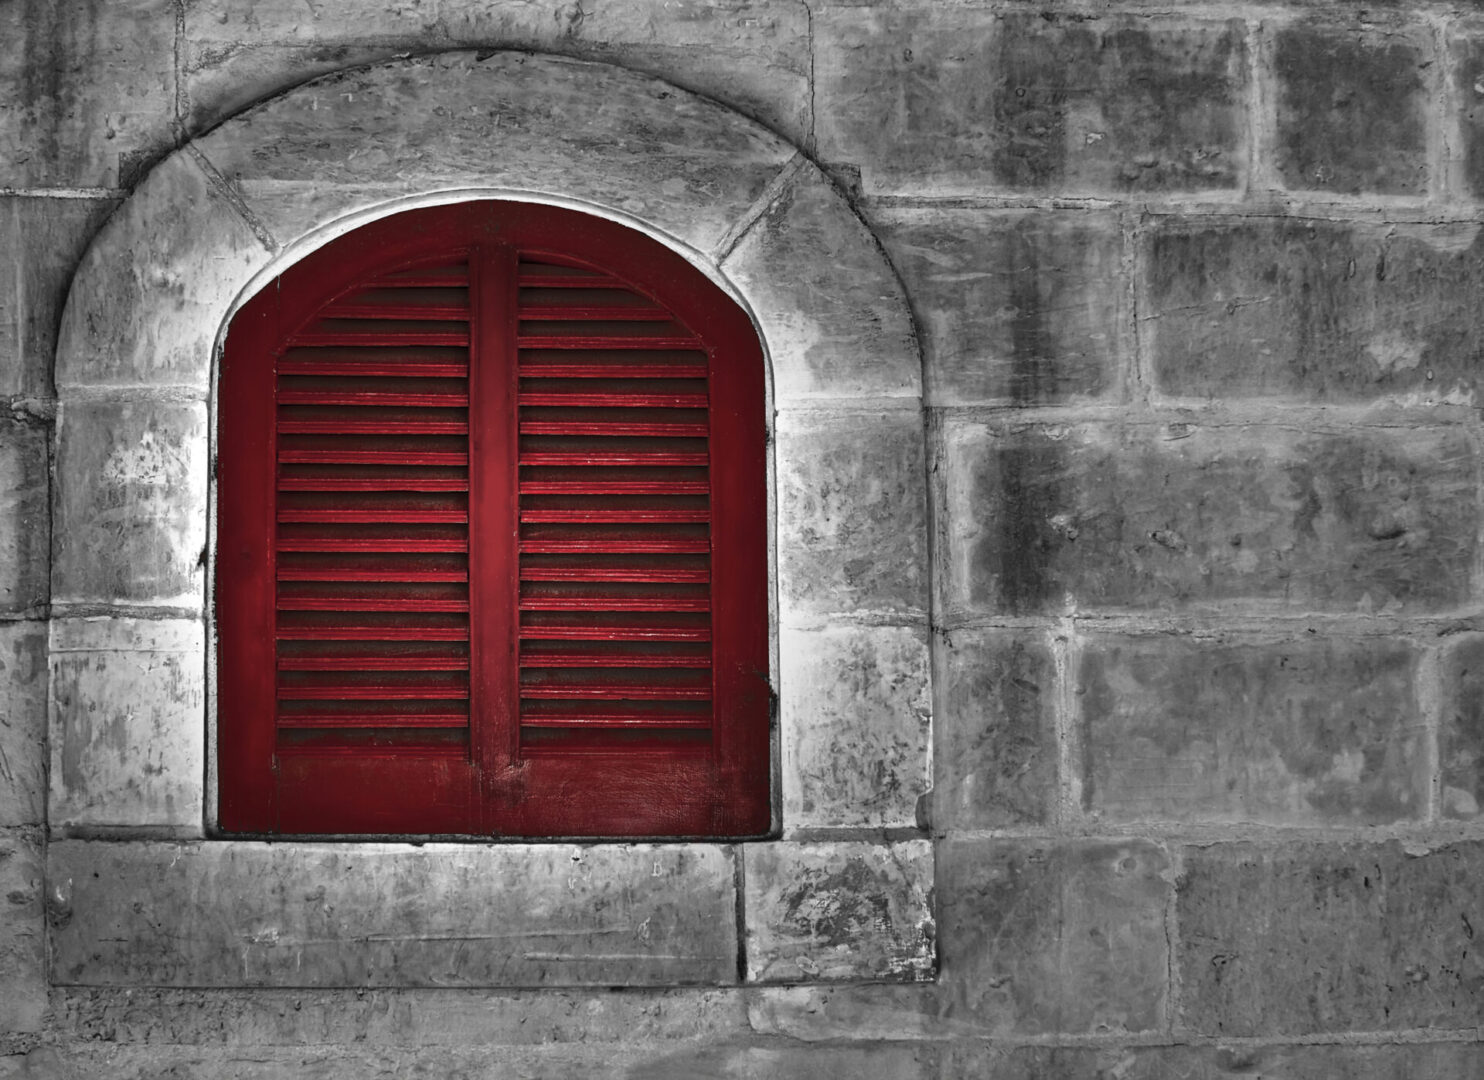 A red window on a concrete wall